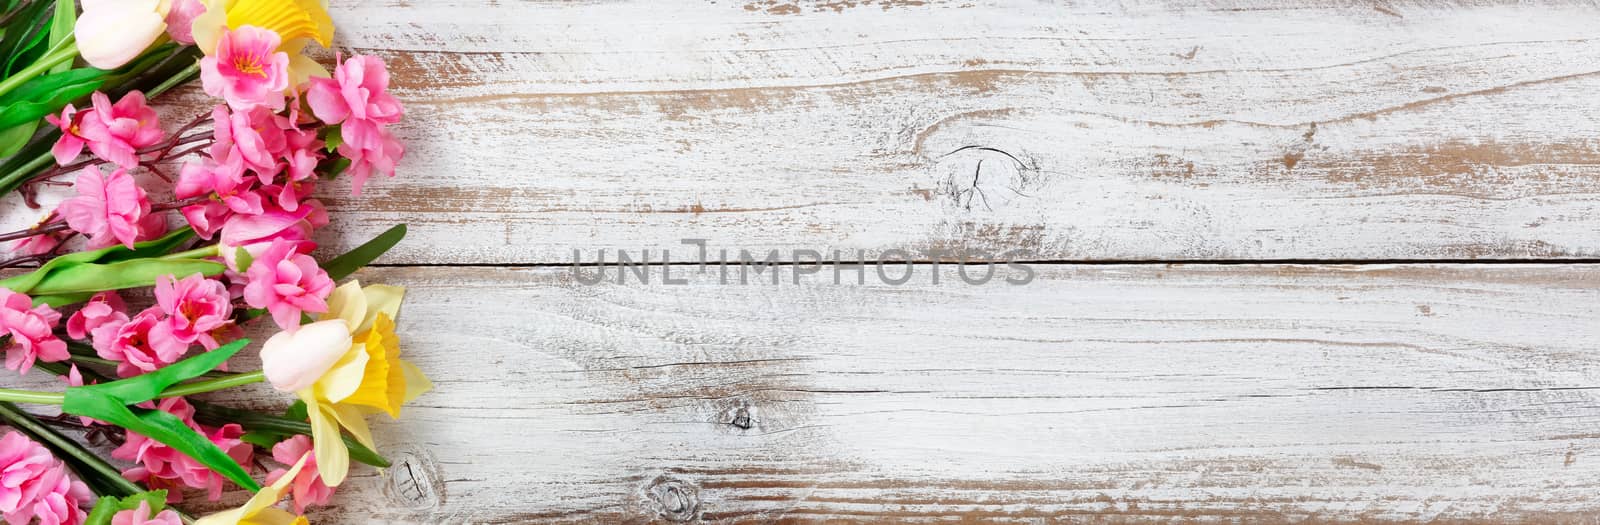 Variety of springtime flowers on white rustic wooden background for seasonal holidays like Easter and Mothers Day 